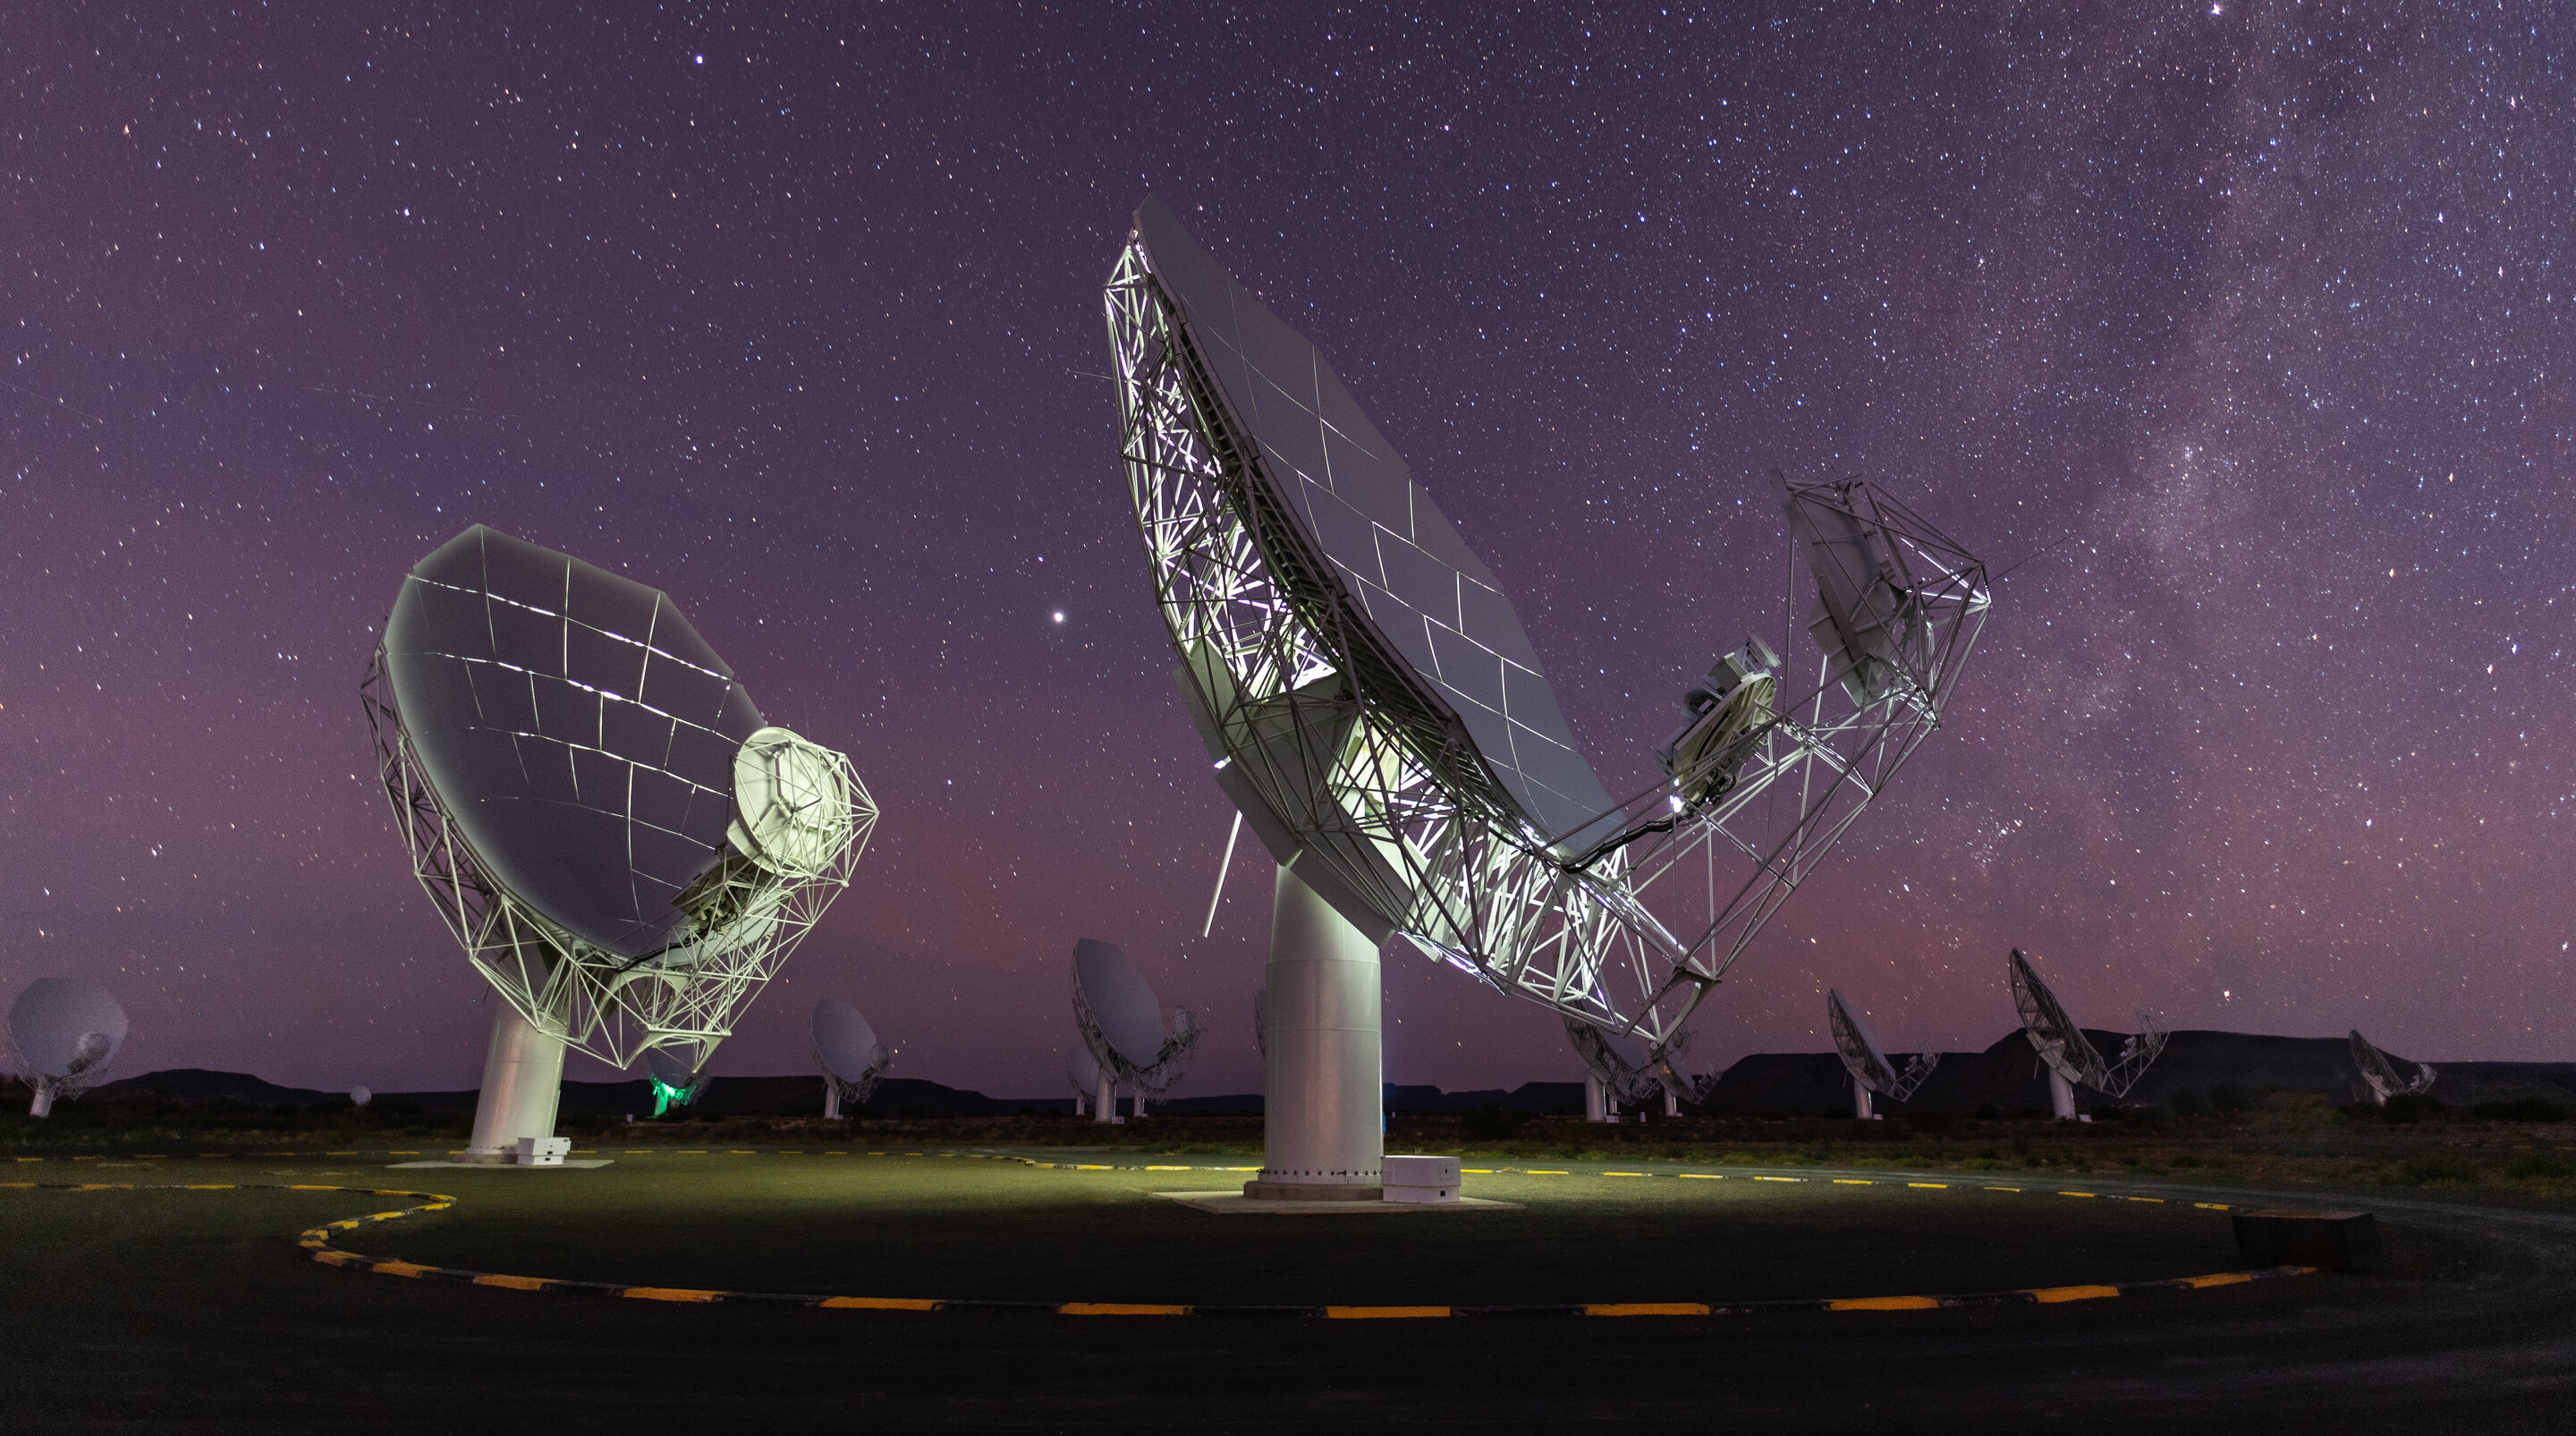 Photograph of the MeerKAT telescope in South Africa